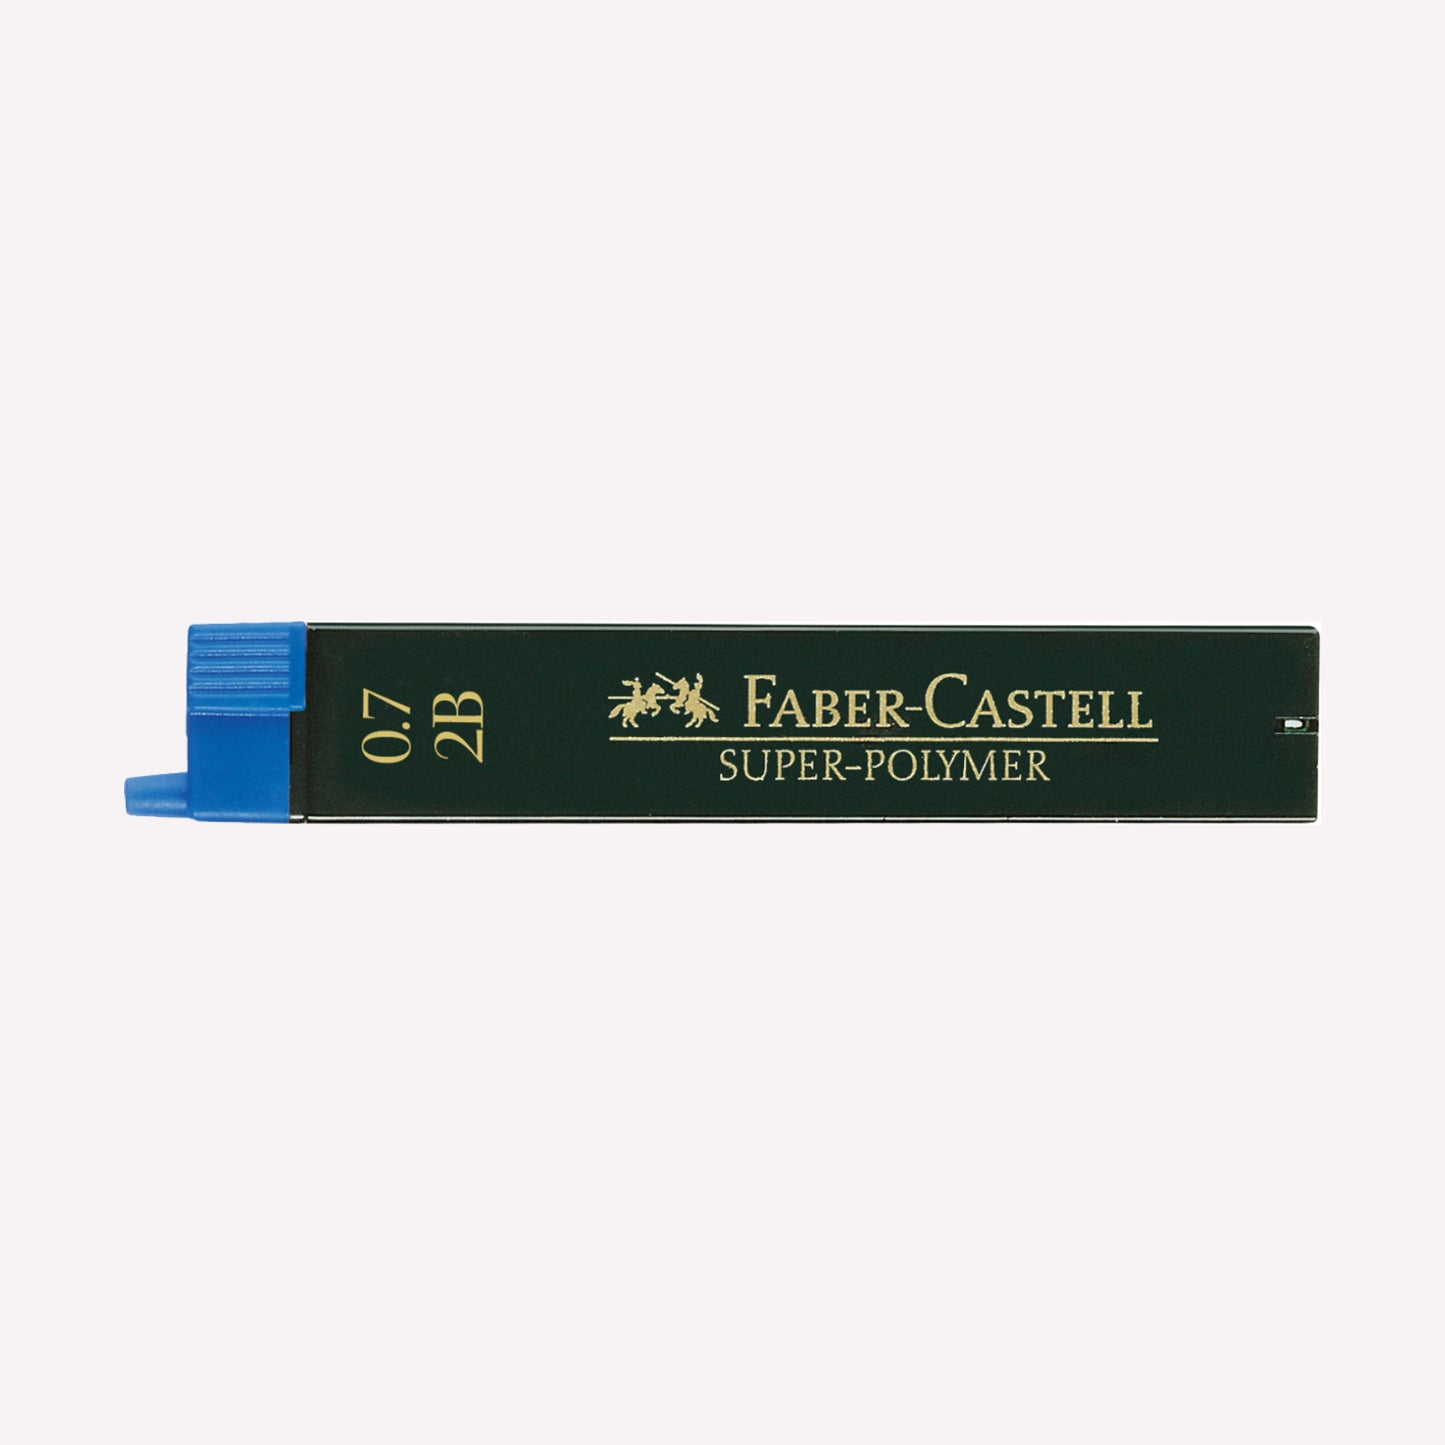 Faber Castell pack of 12 2B 0.7mm Super Polymer Leads in a green package with a blue lid. 